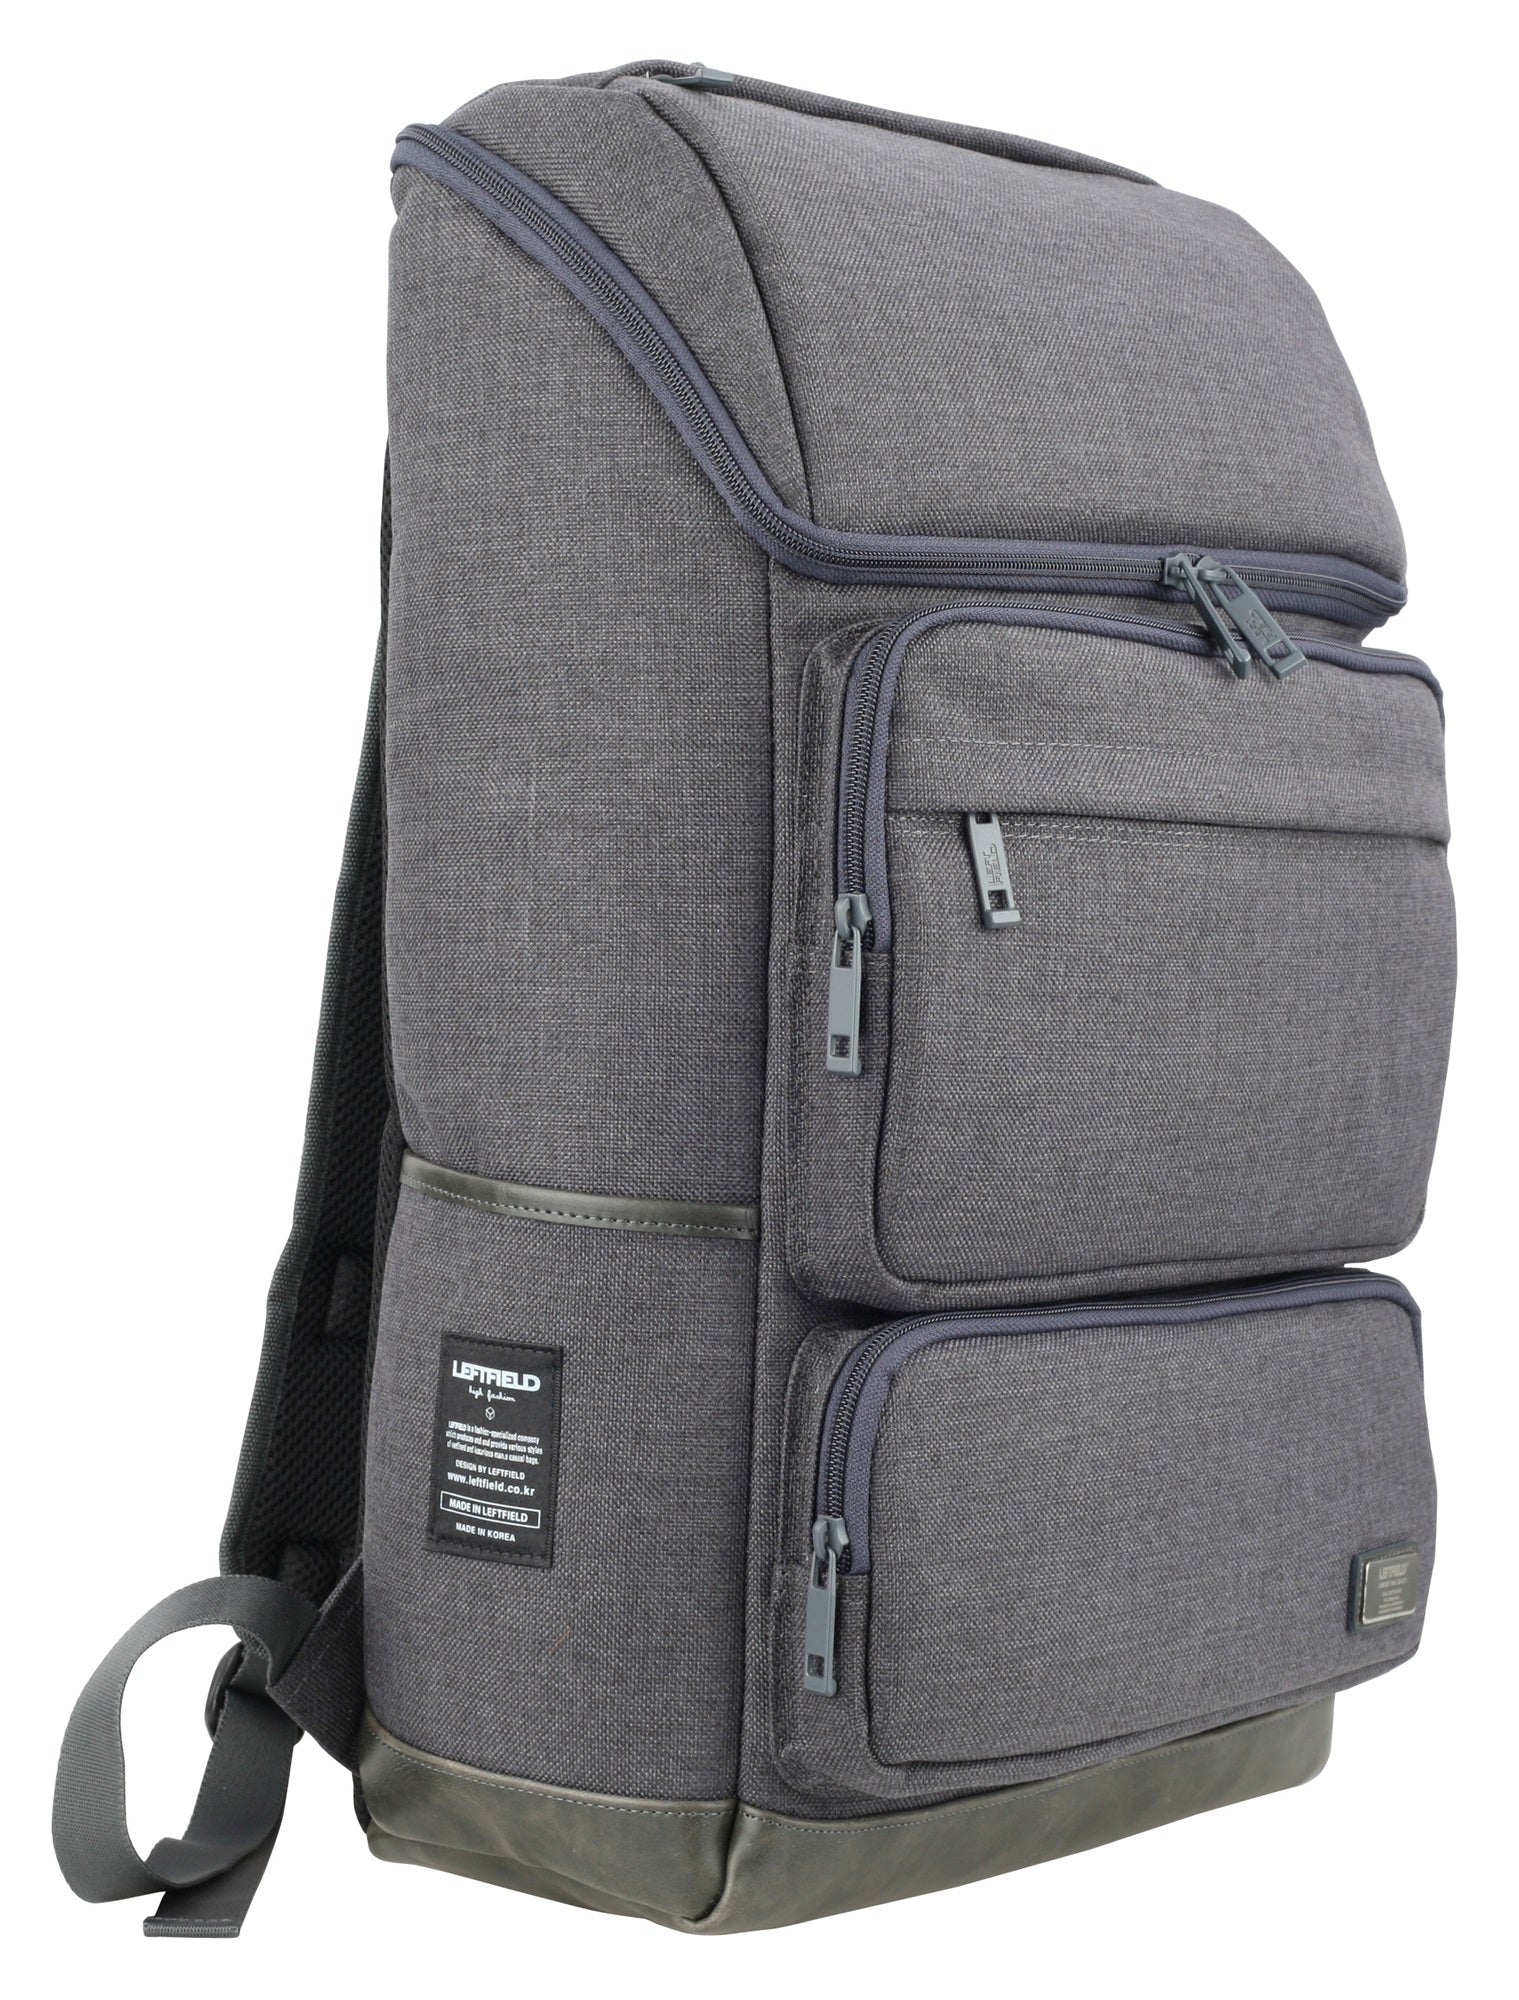 Black Canvas Casual Laptop Daypack Travel Backpacks